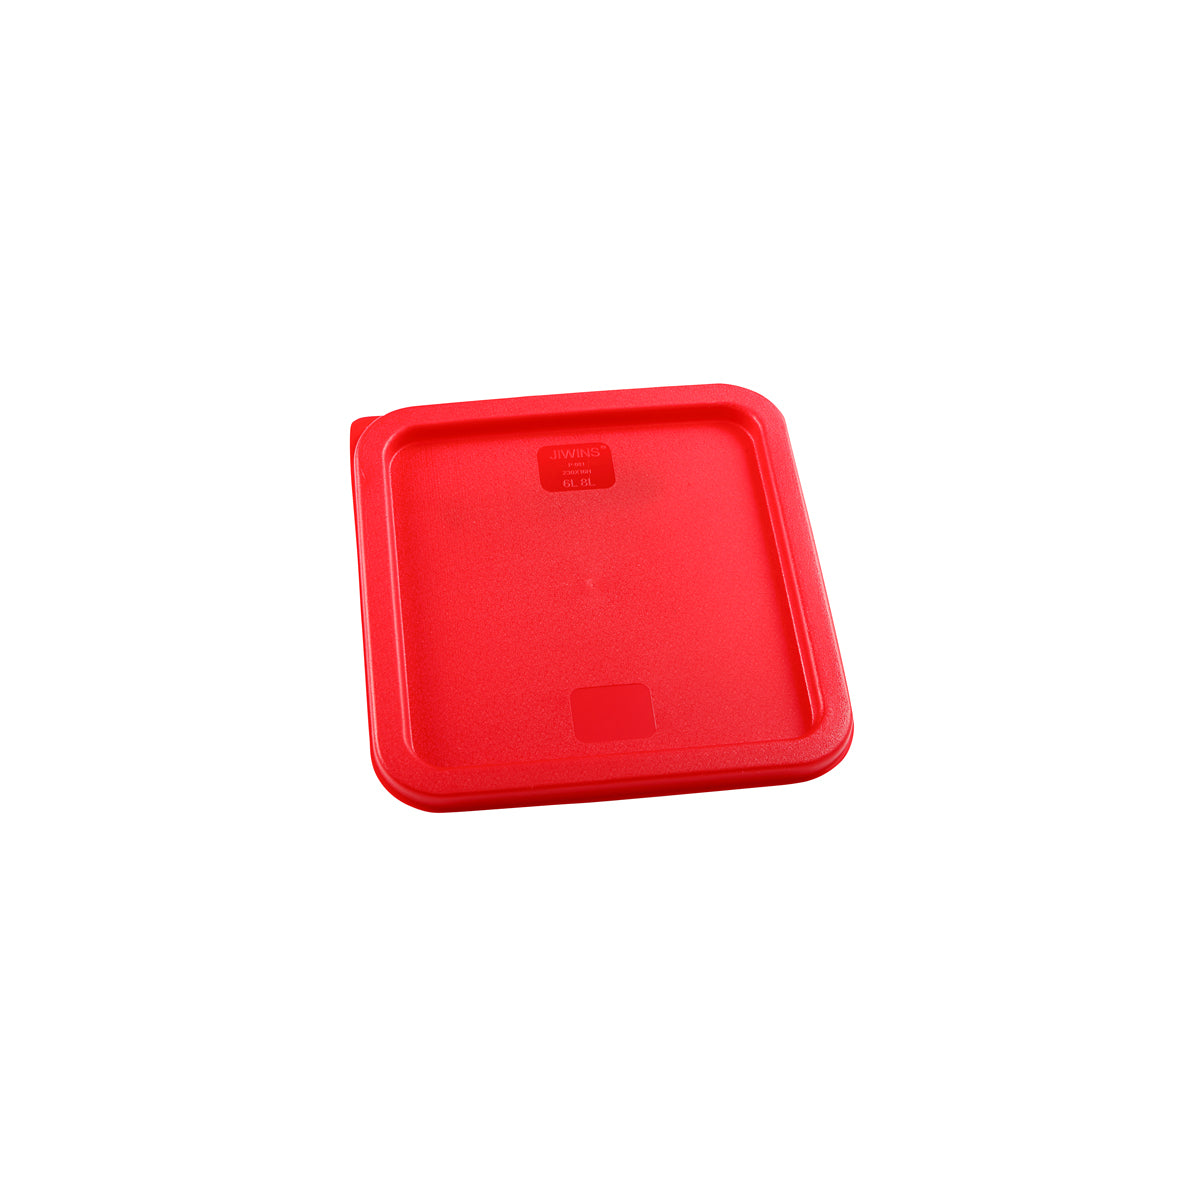 JW-P-081 Jiwins Square Lid to Suit Food Container Red 230x230x16mm Tomkin Australia Hospitality Supplies